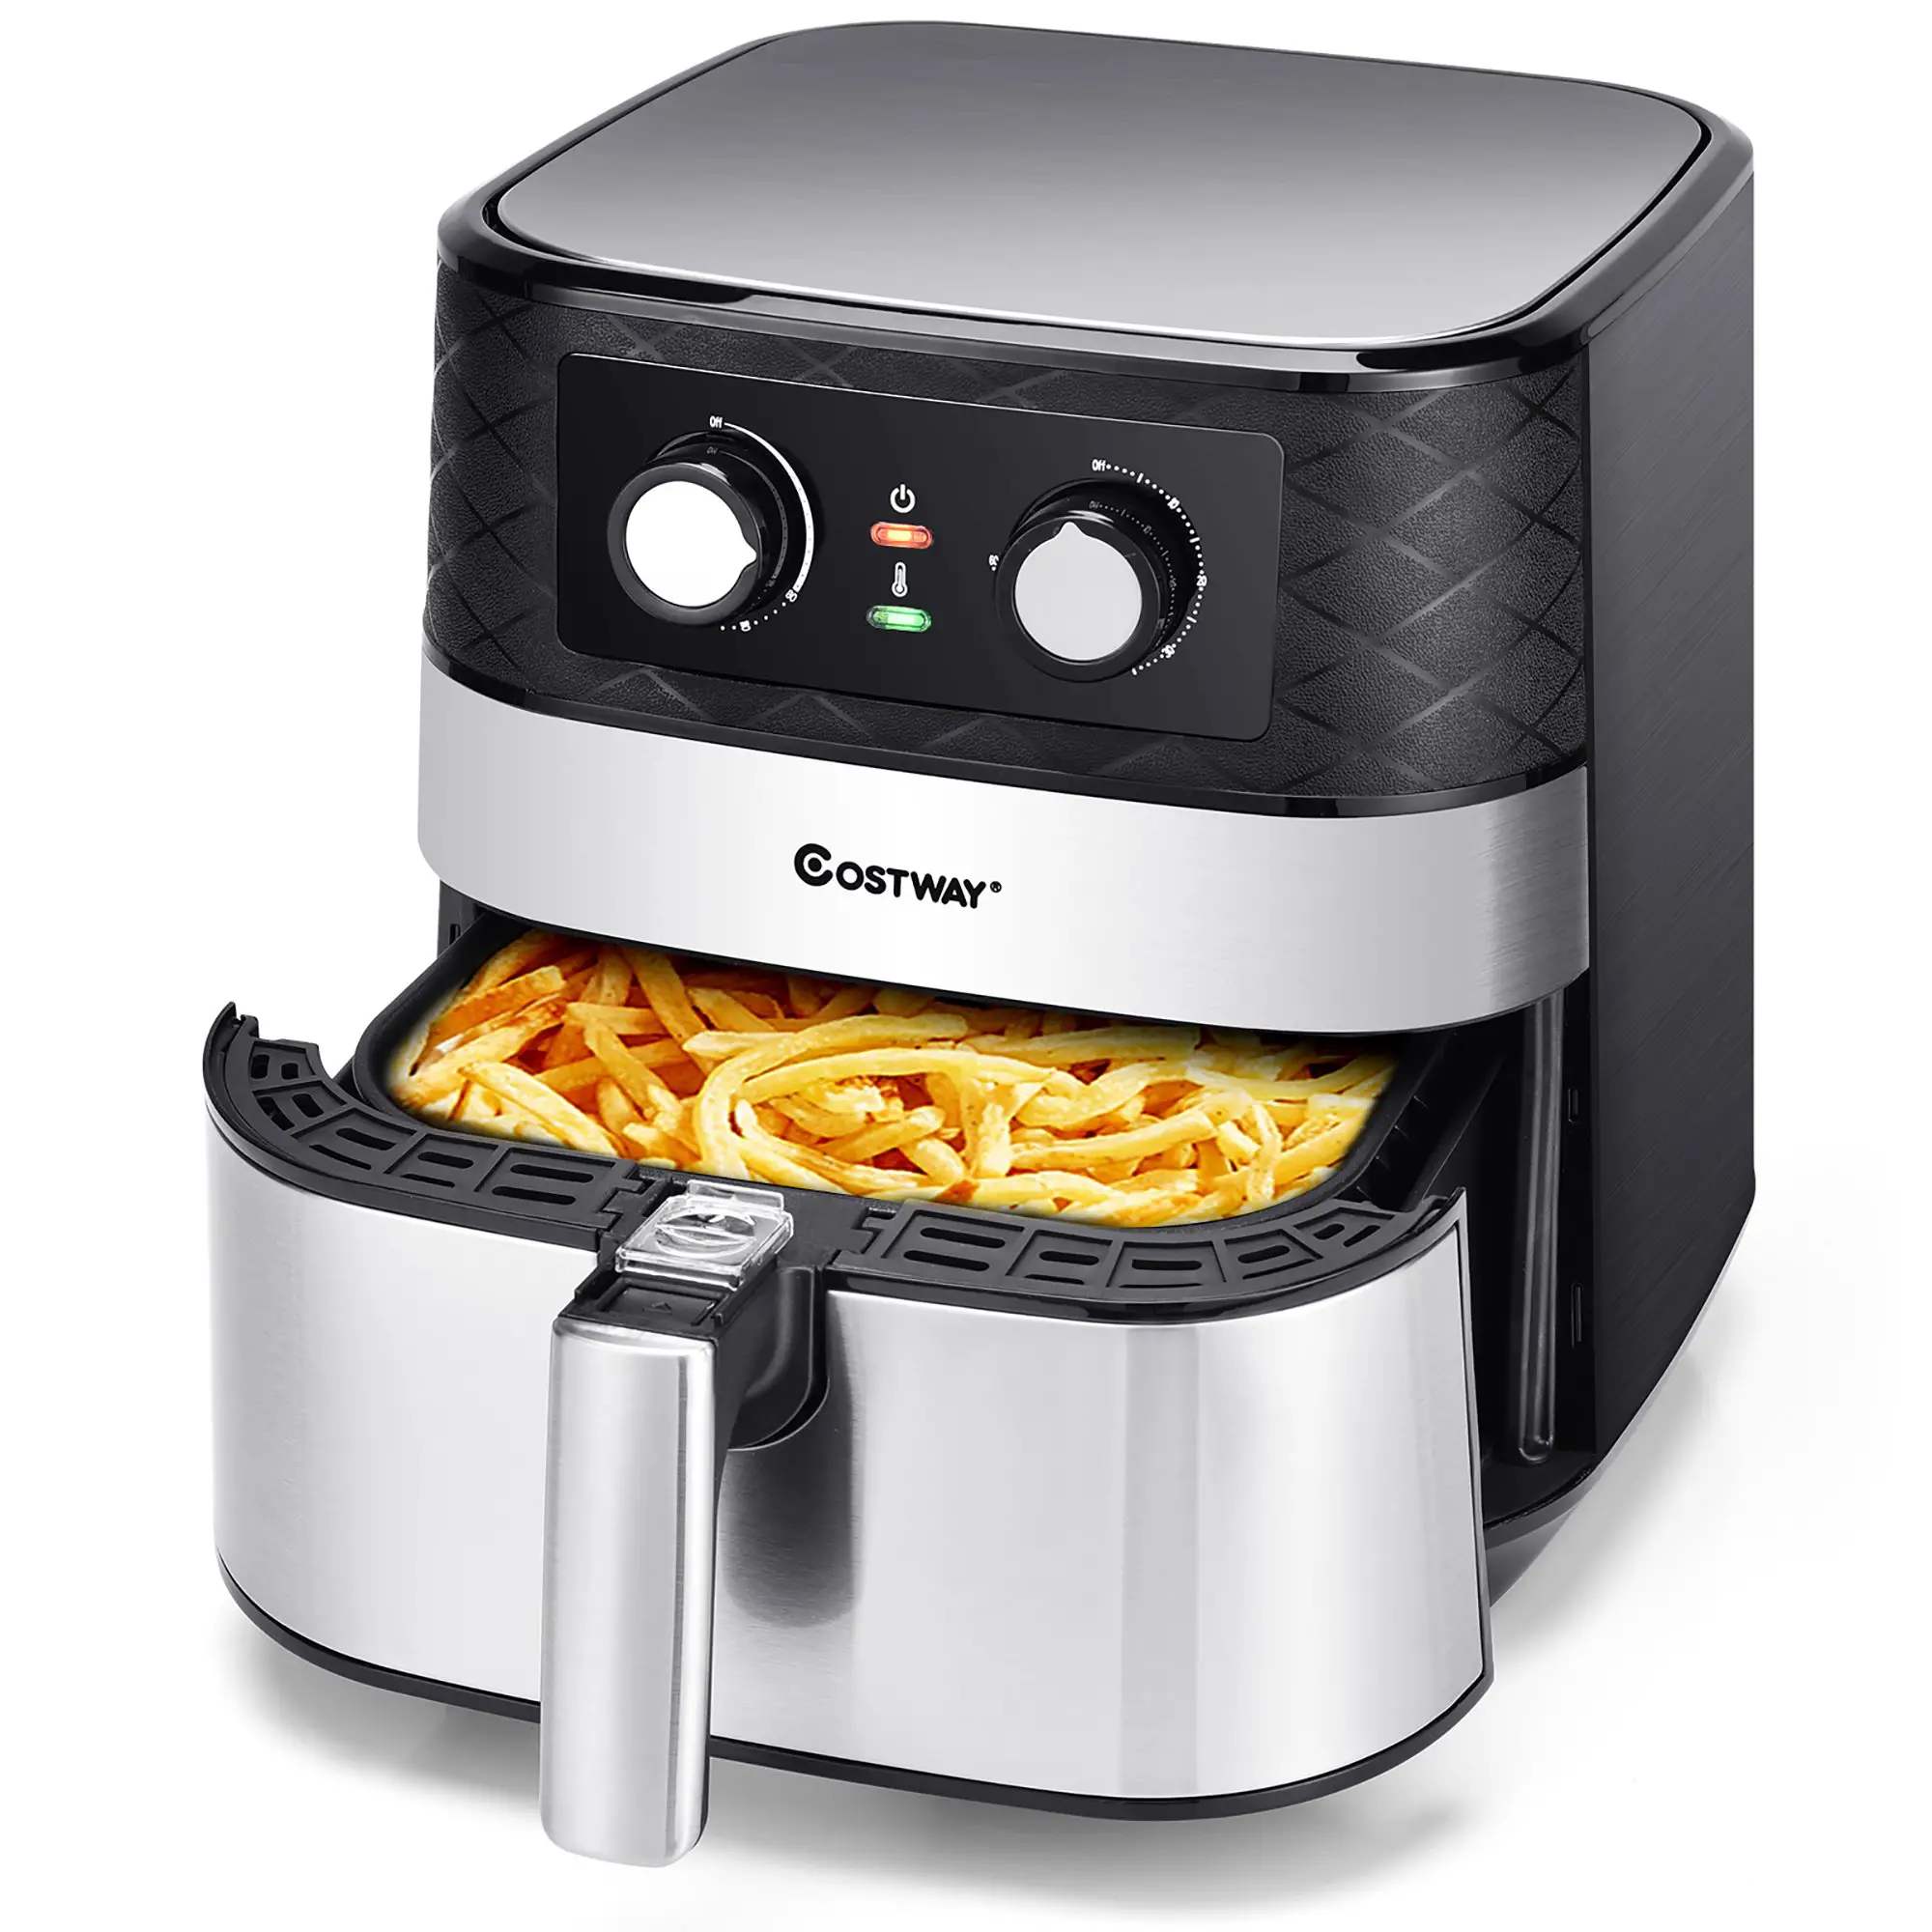 Costway 5.3 QT Electric Hot Air Fryer 1700W Stainless ...